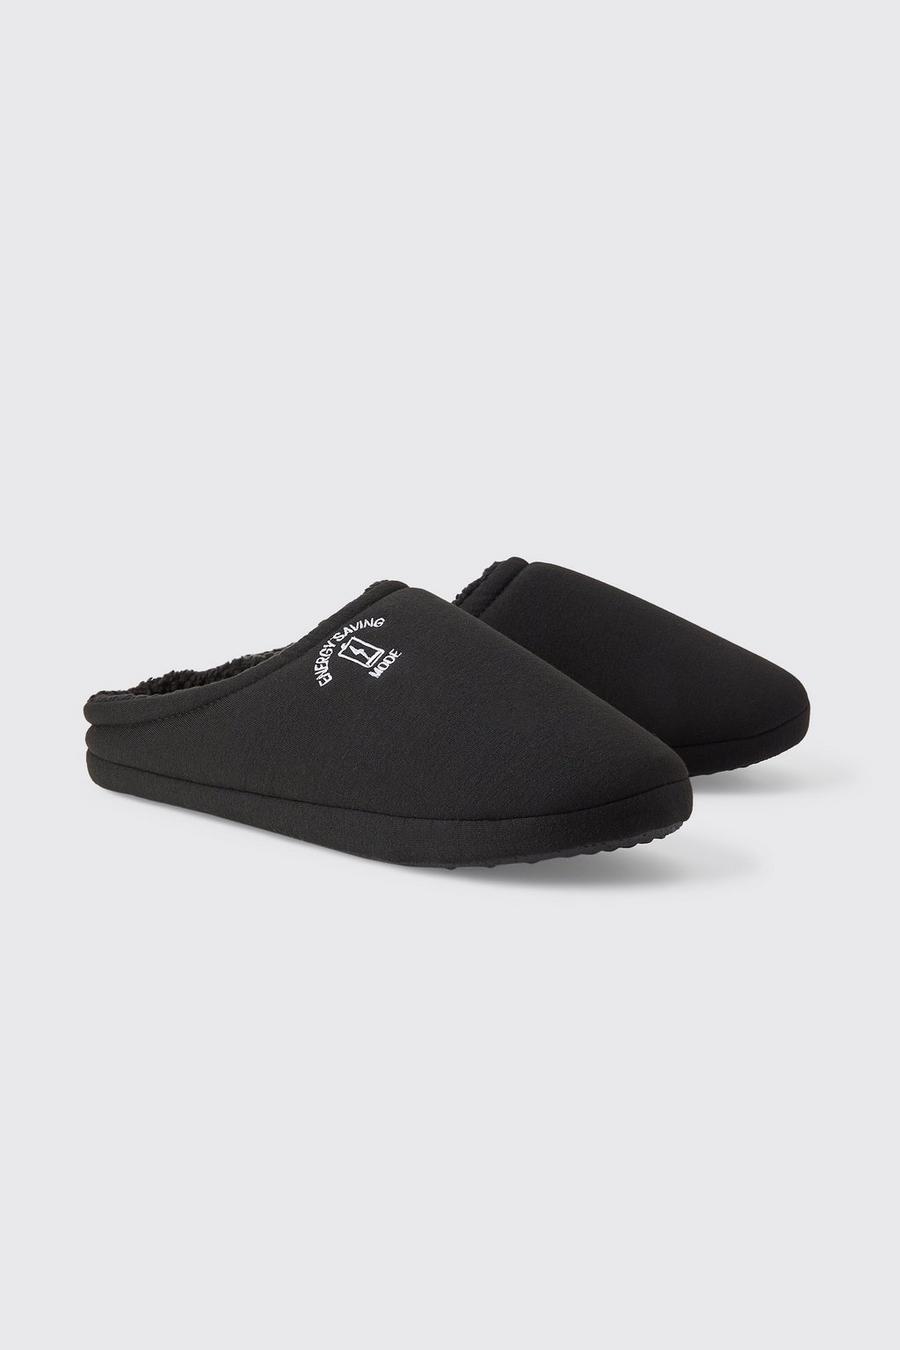 Black Embroidered Jersey Knit Slippers